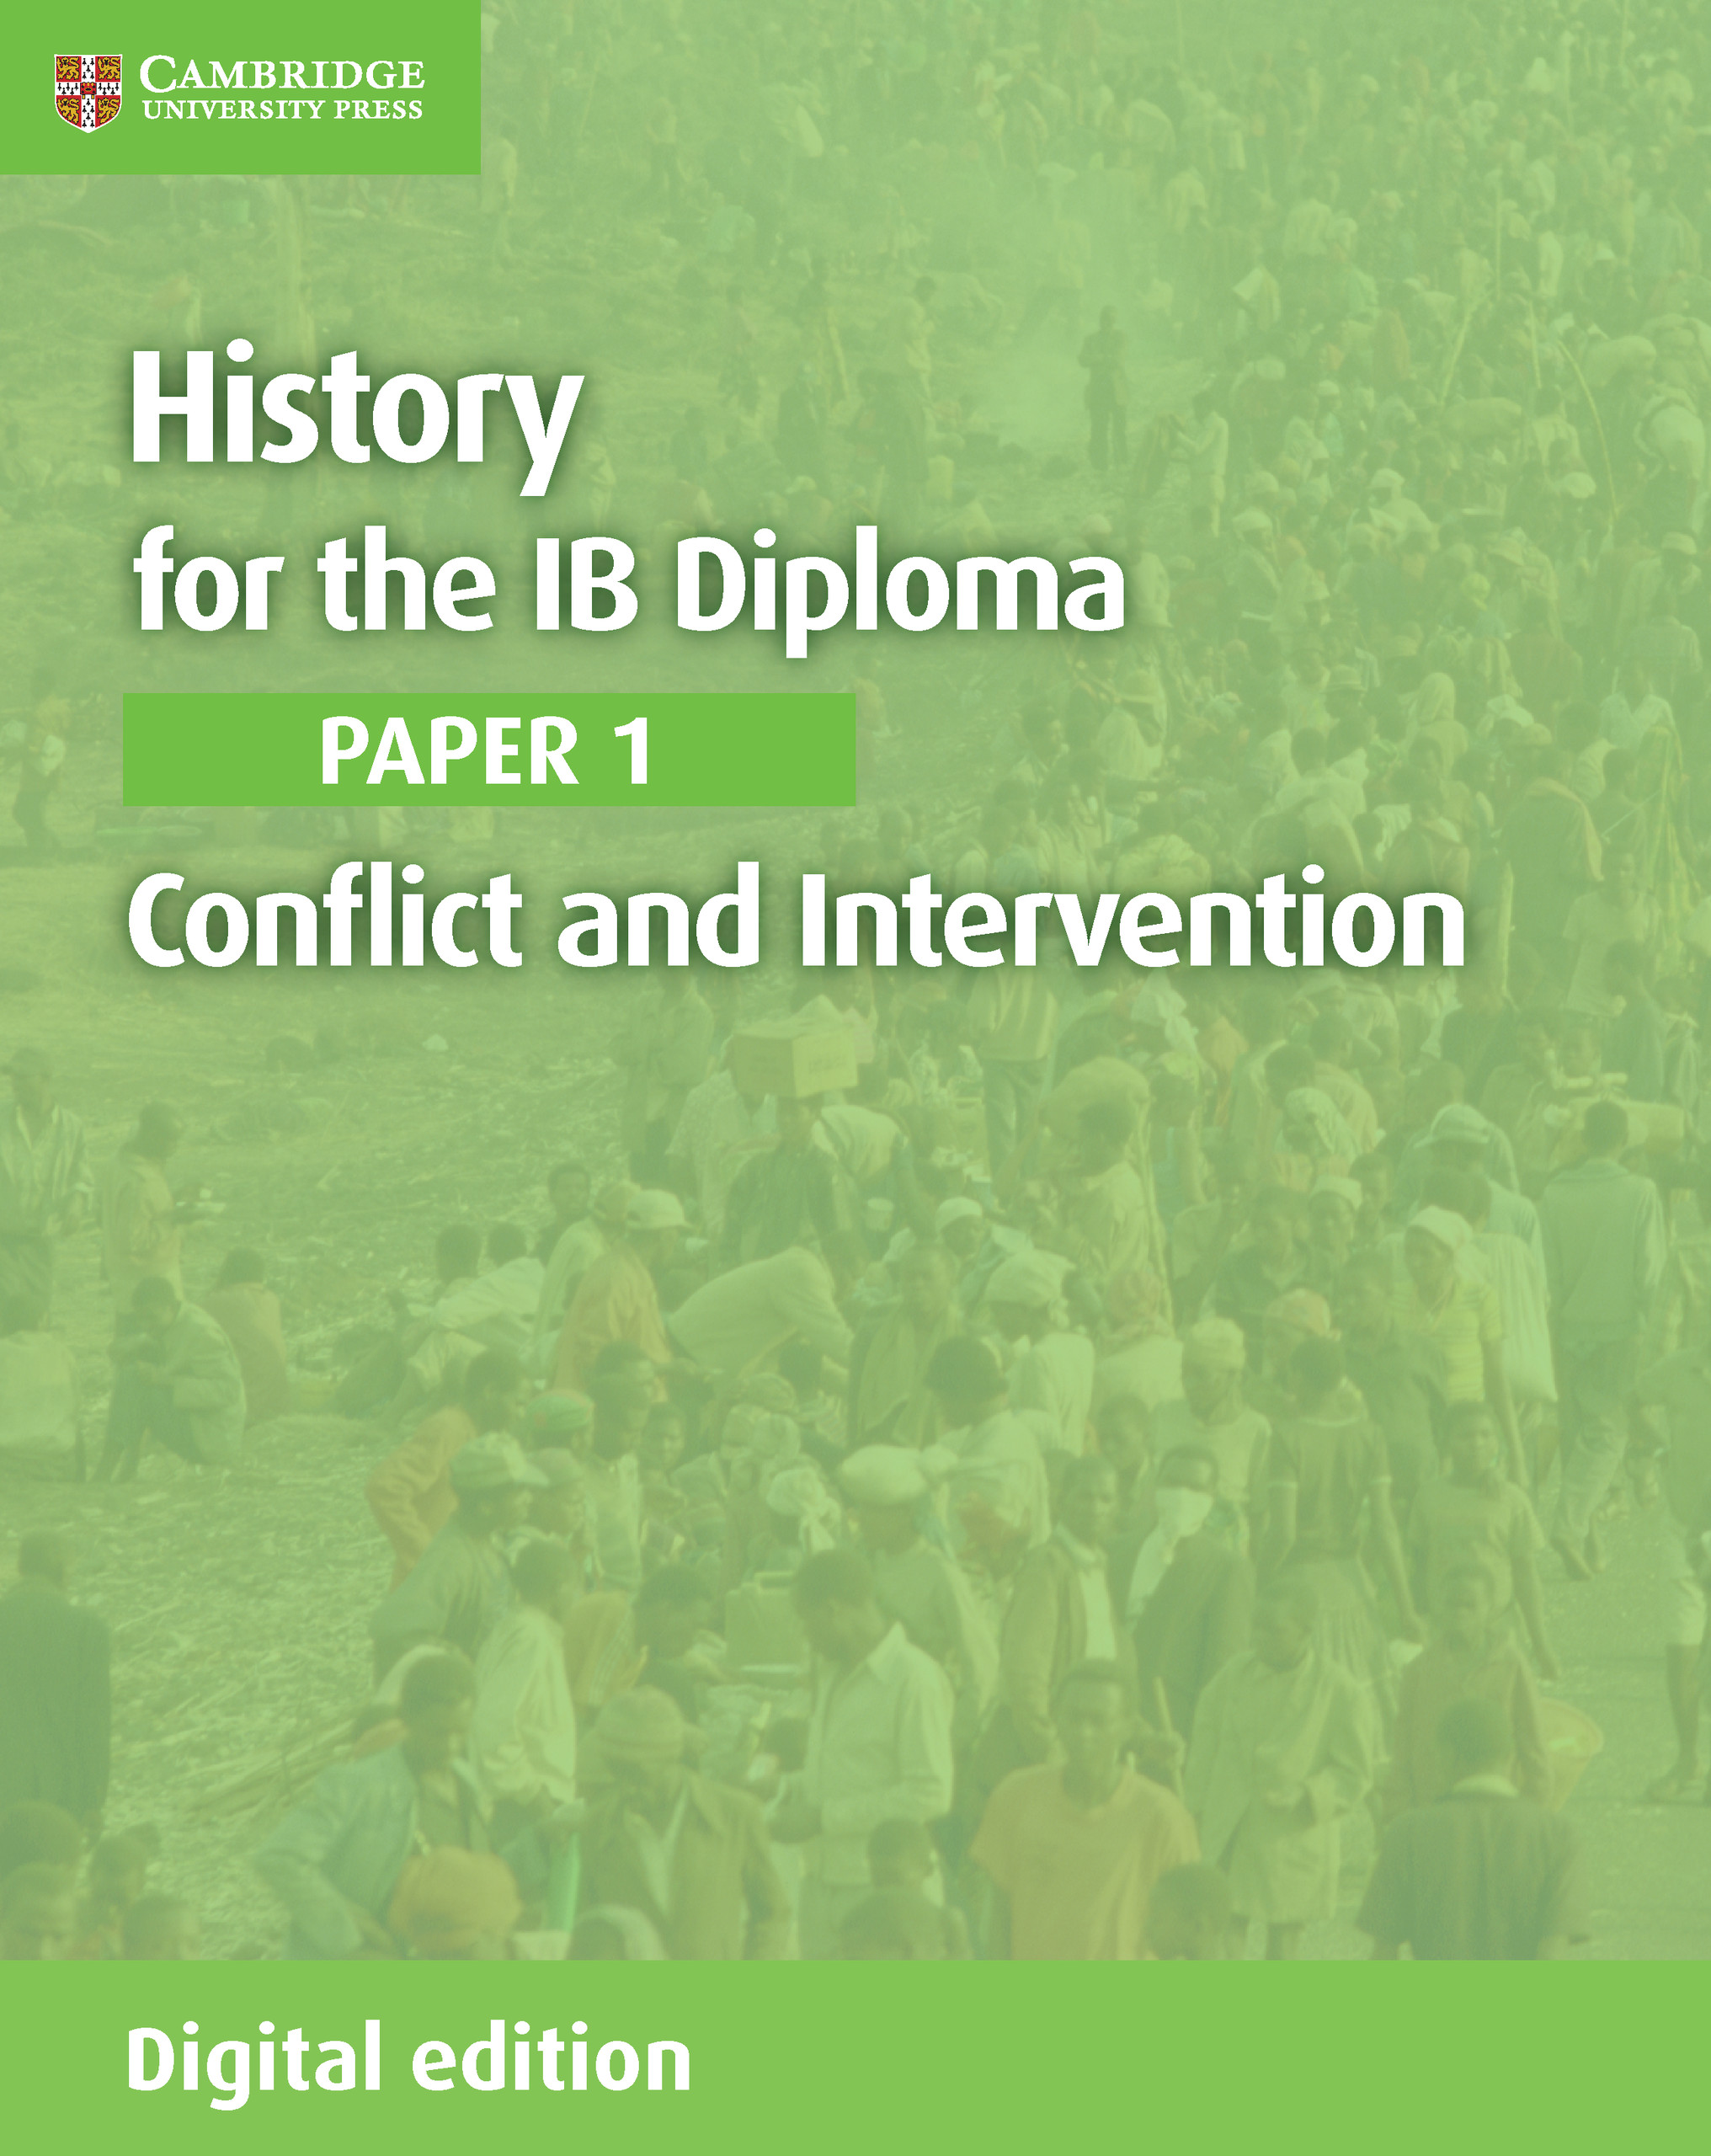 IB History Paper 1: Conflict and Intervention